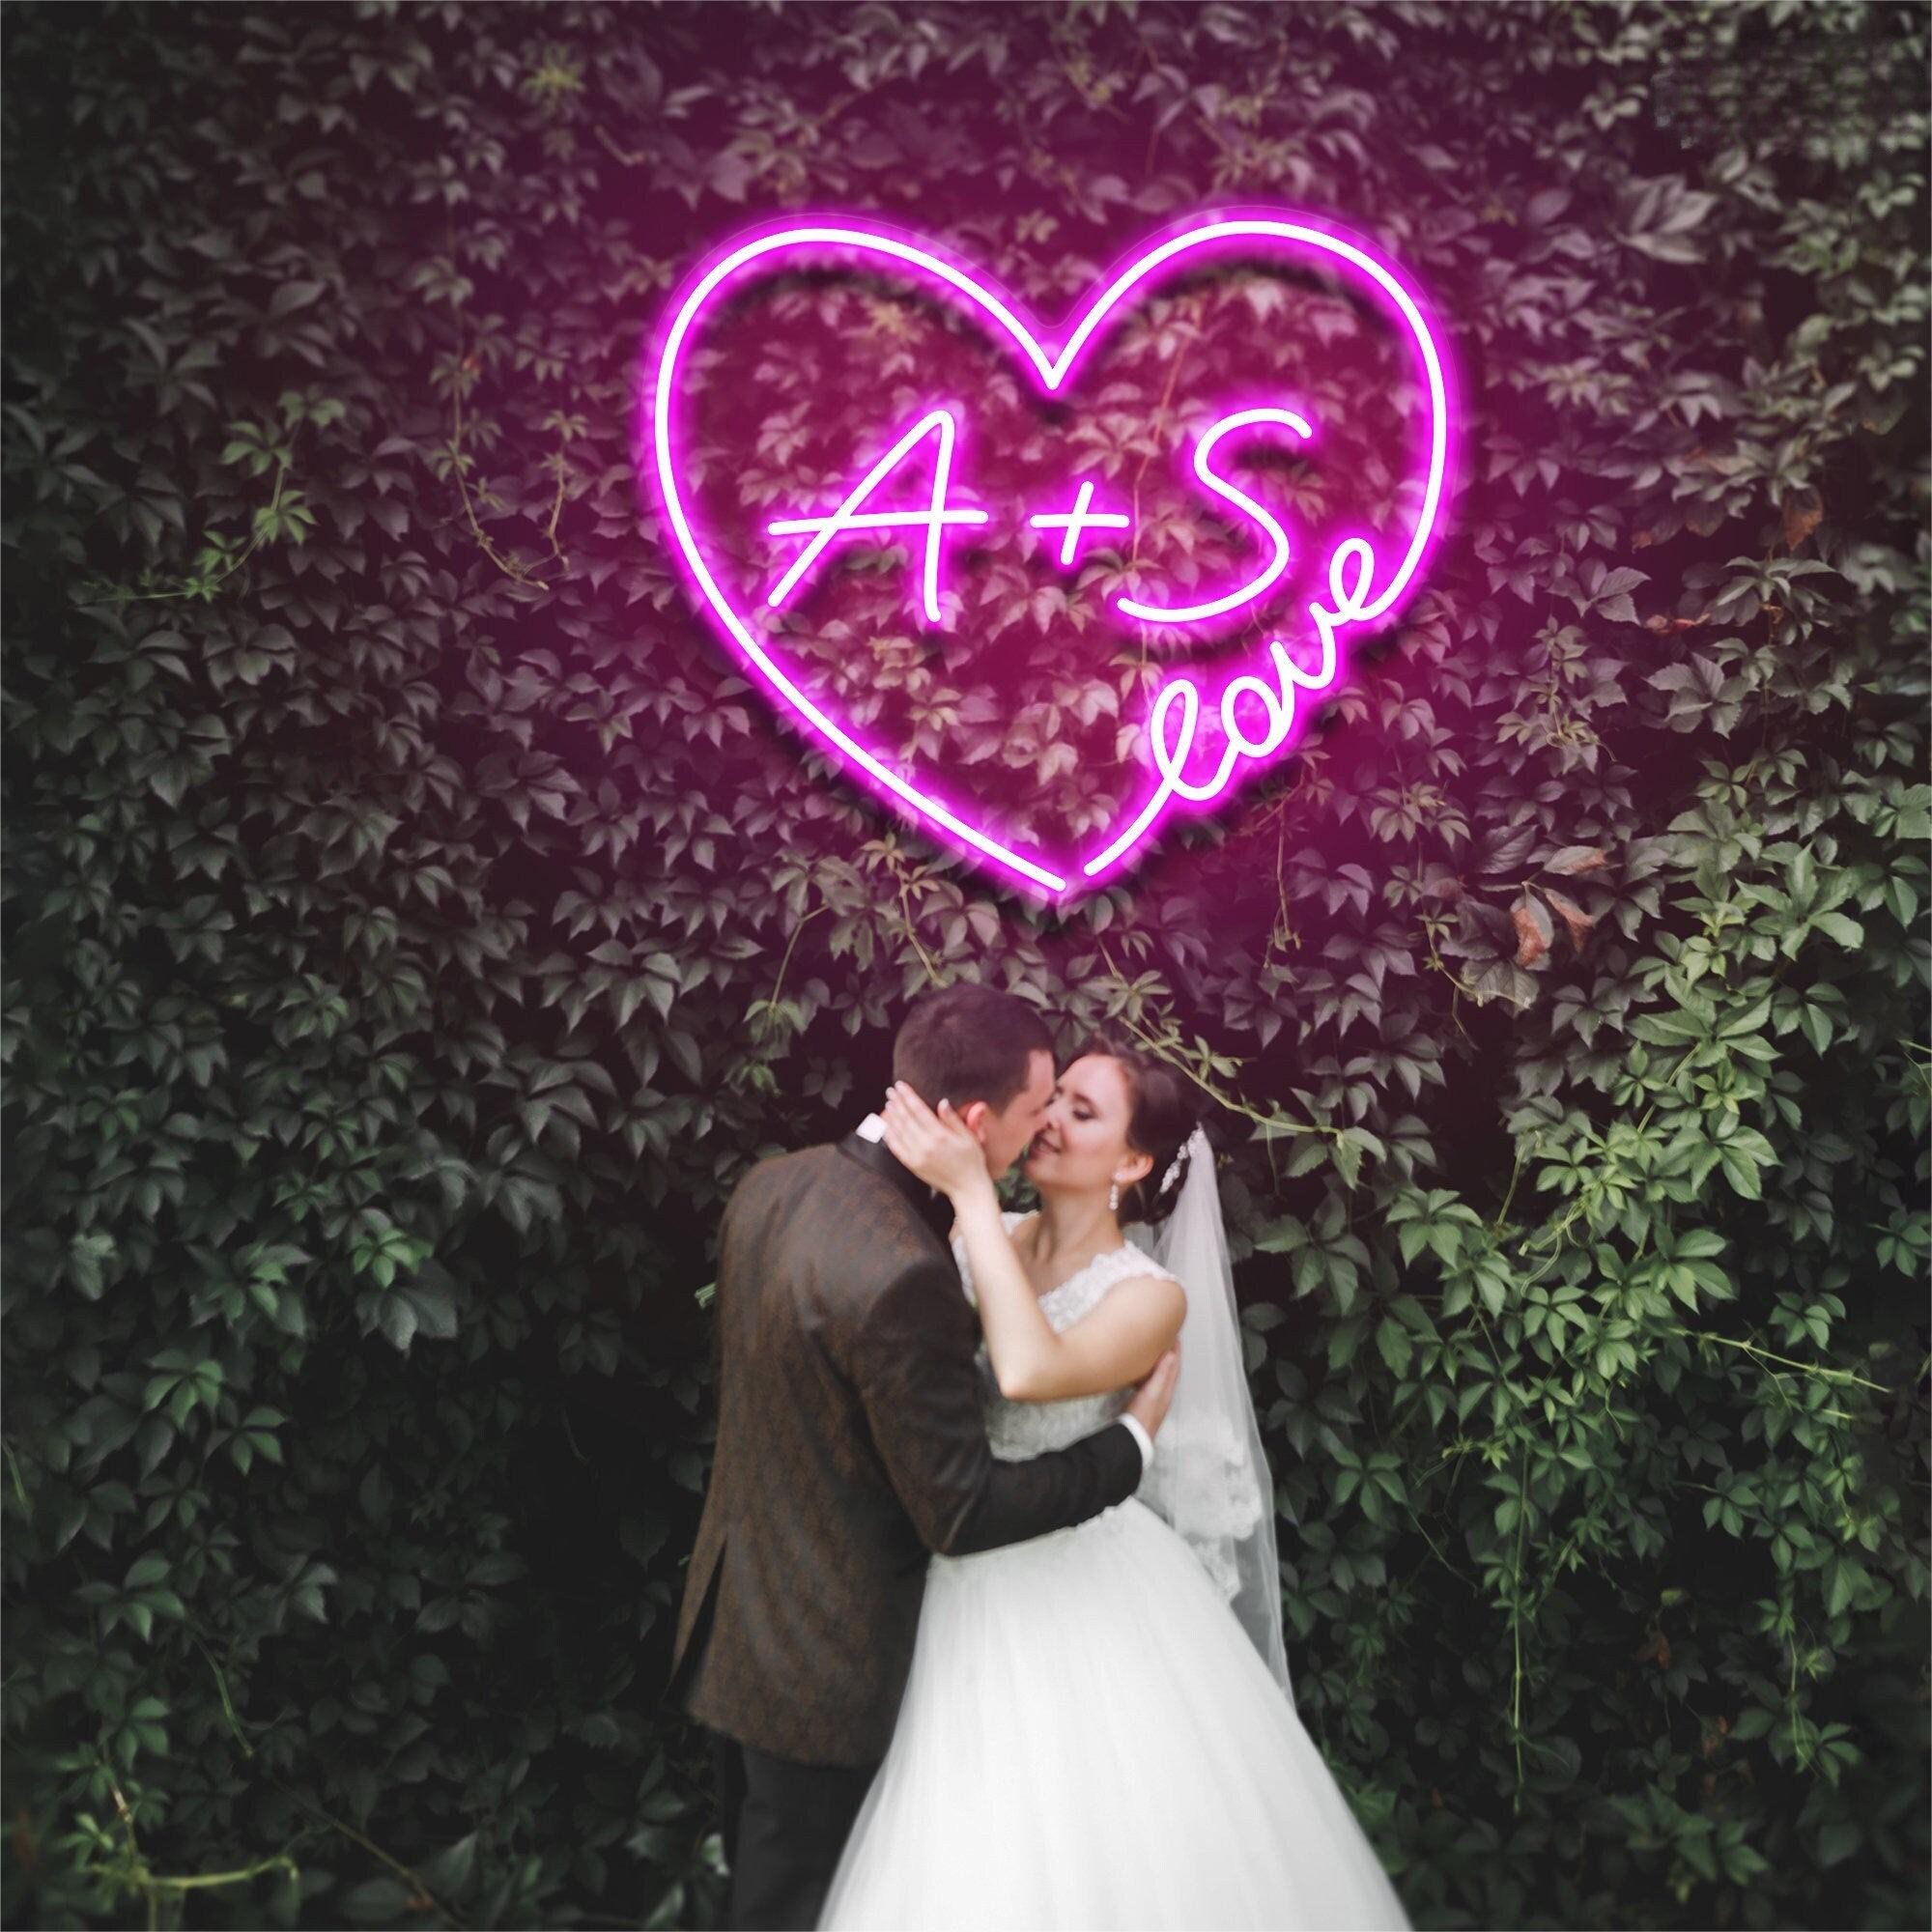 NEONIP-Personalized 100% Handmade Wedding LED Neon Sign with Love Heart and Your Initial Letters